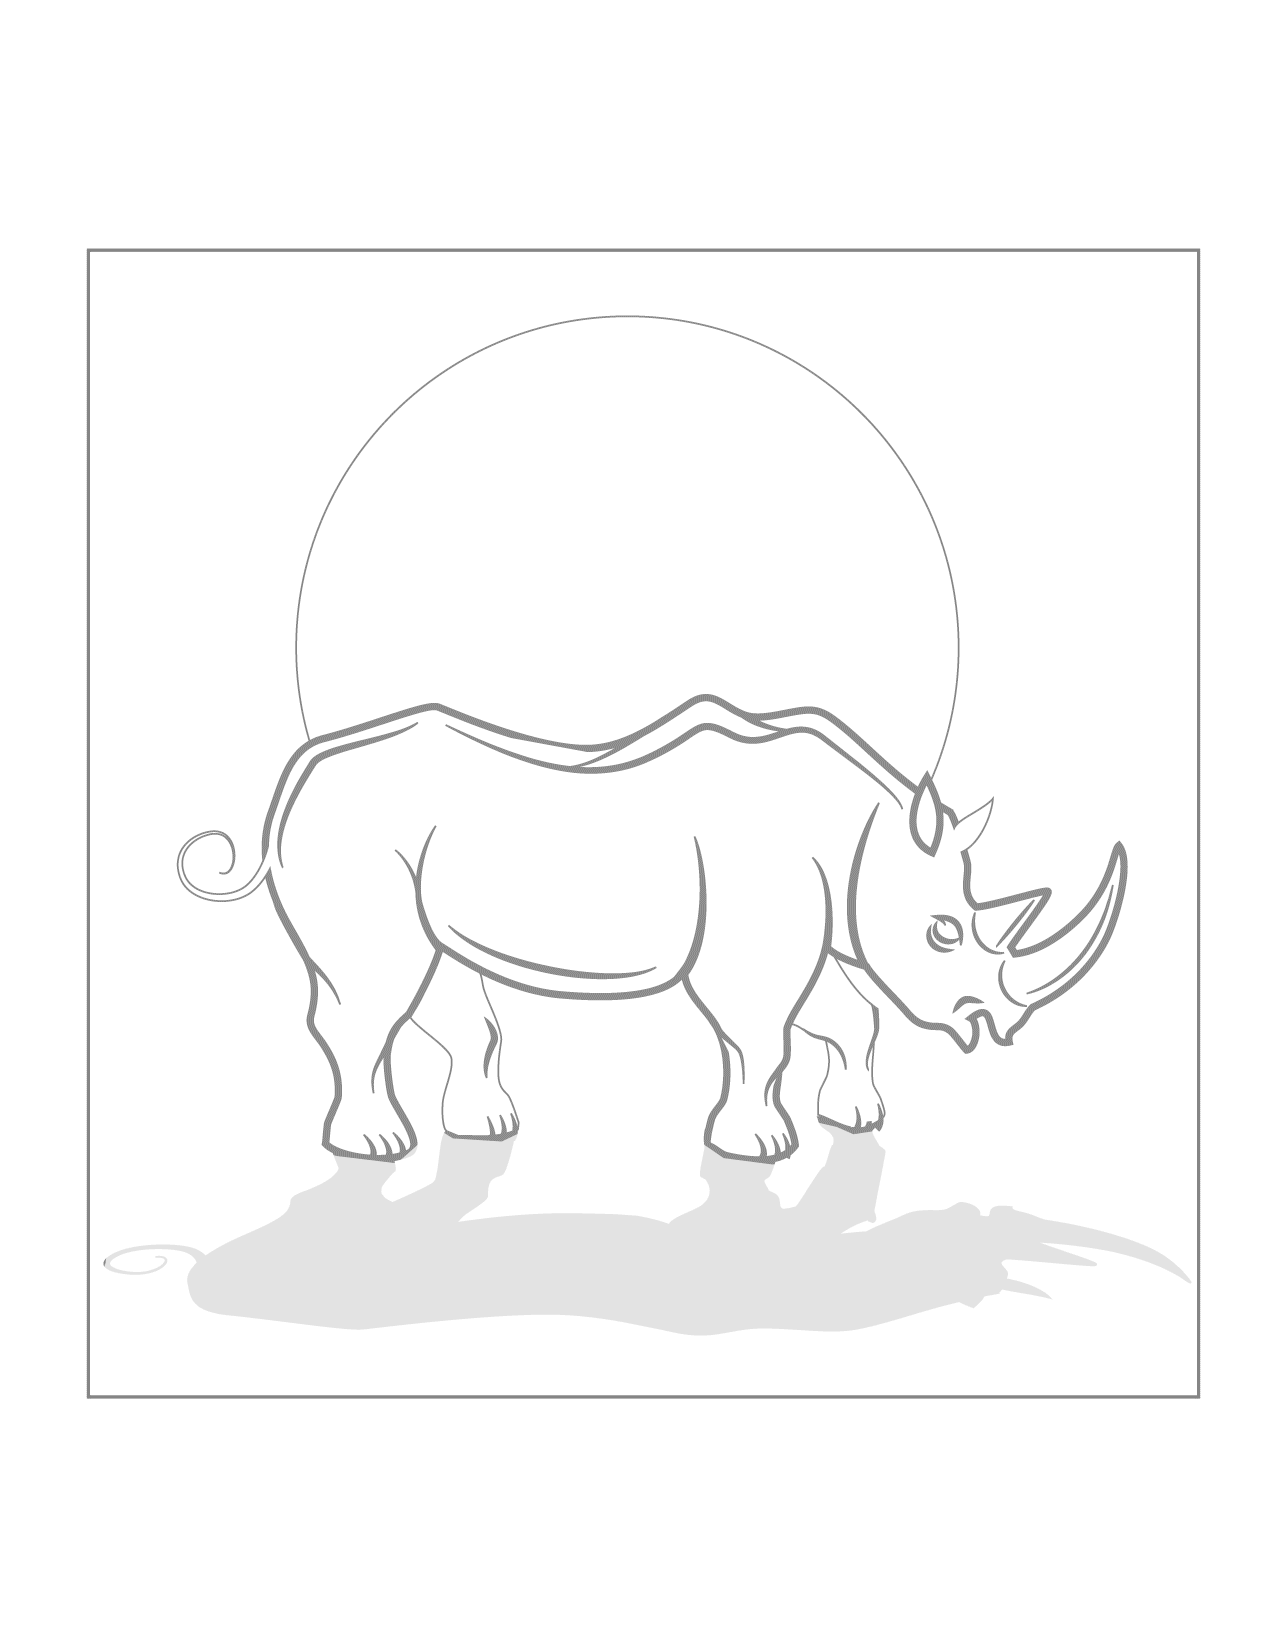 Rhinocerous Coloring Page